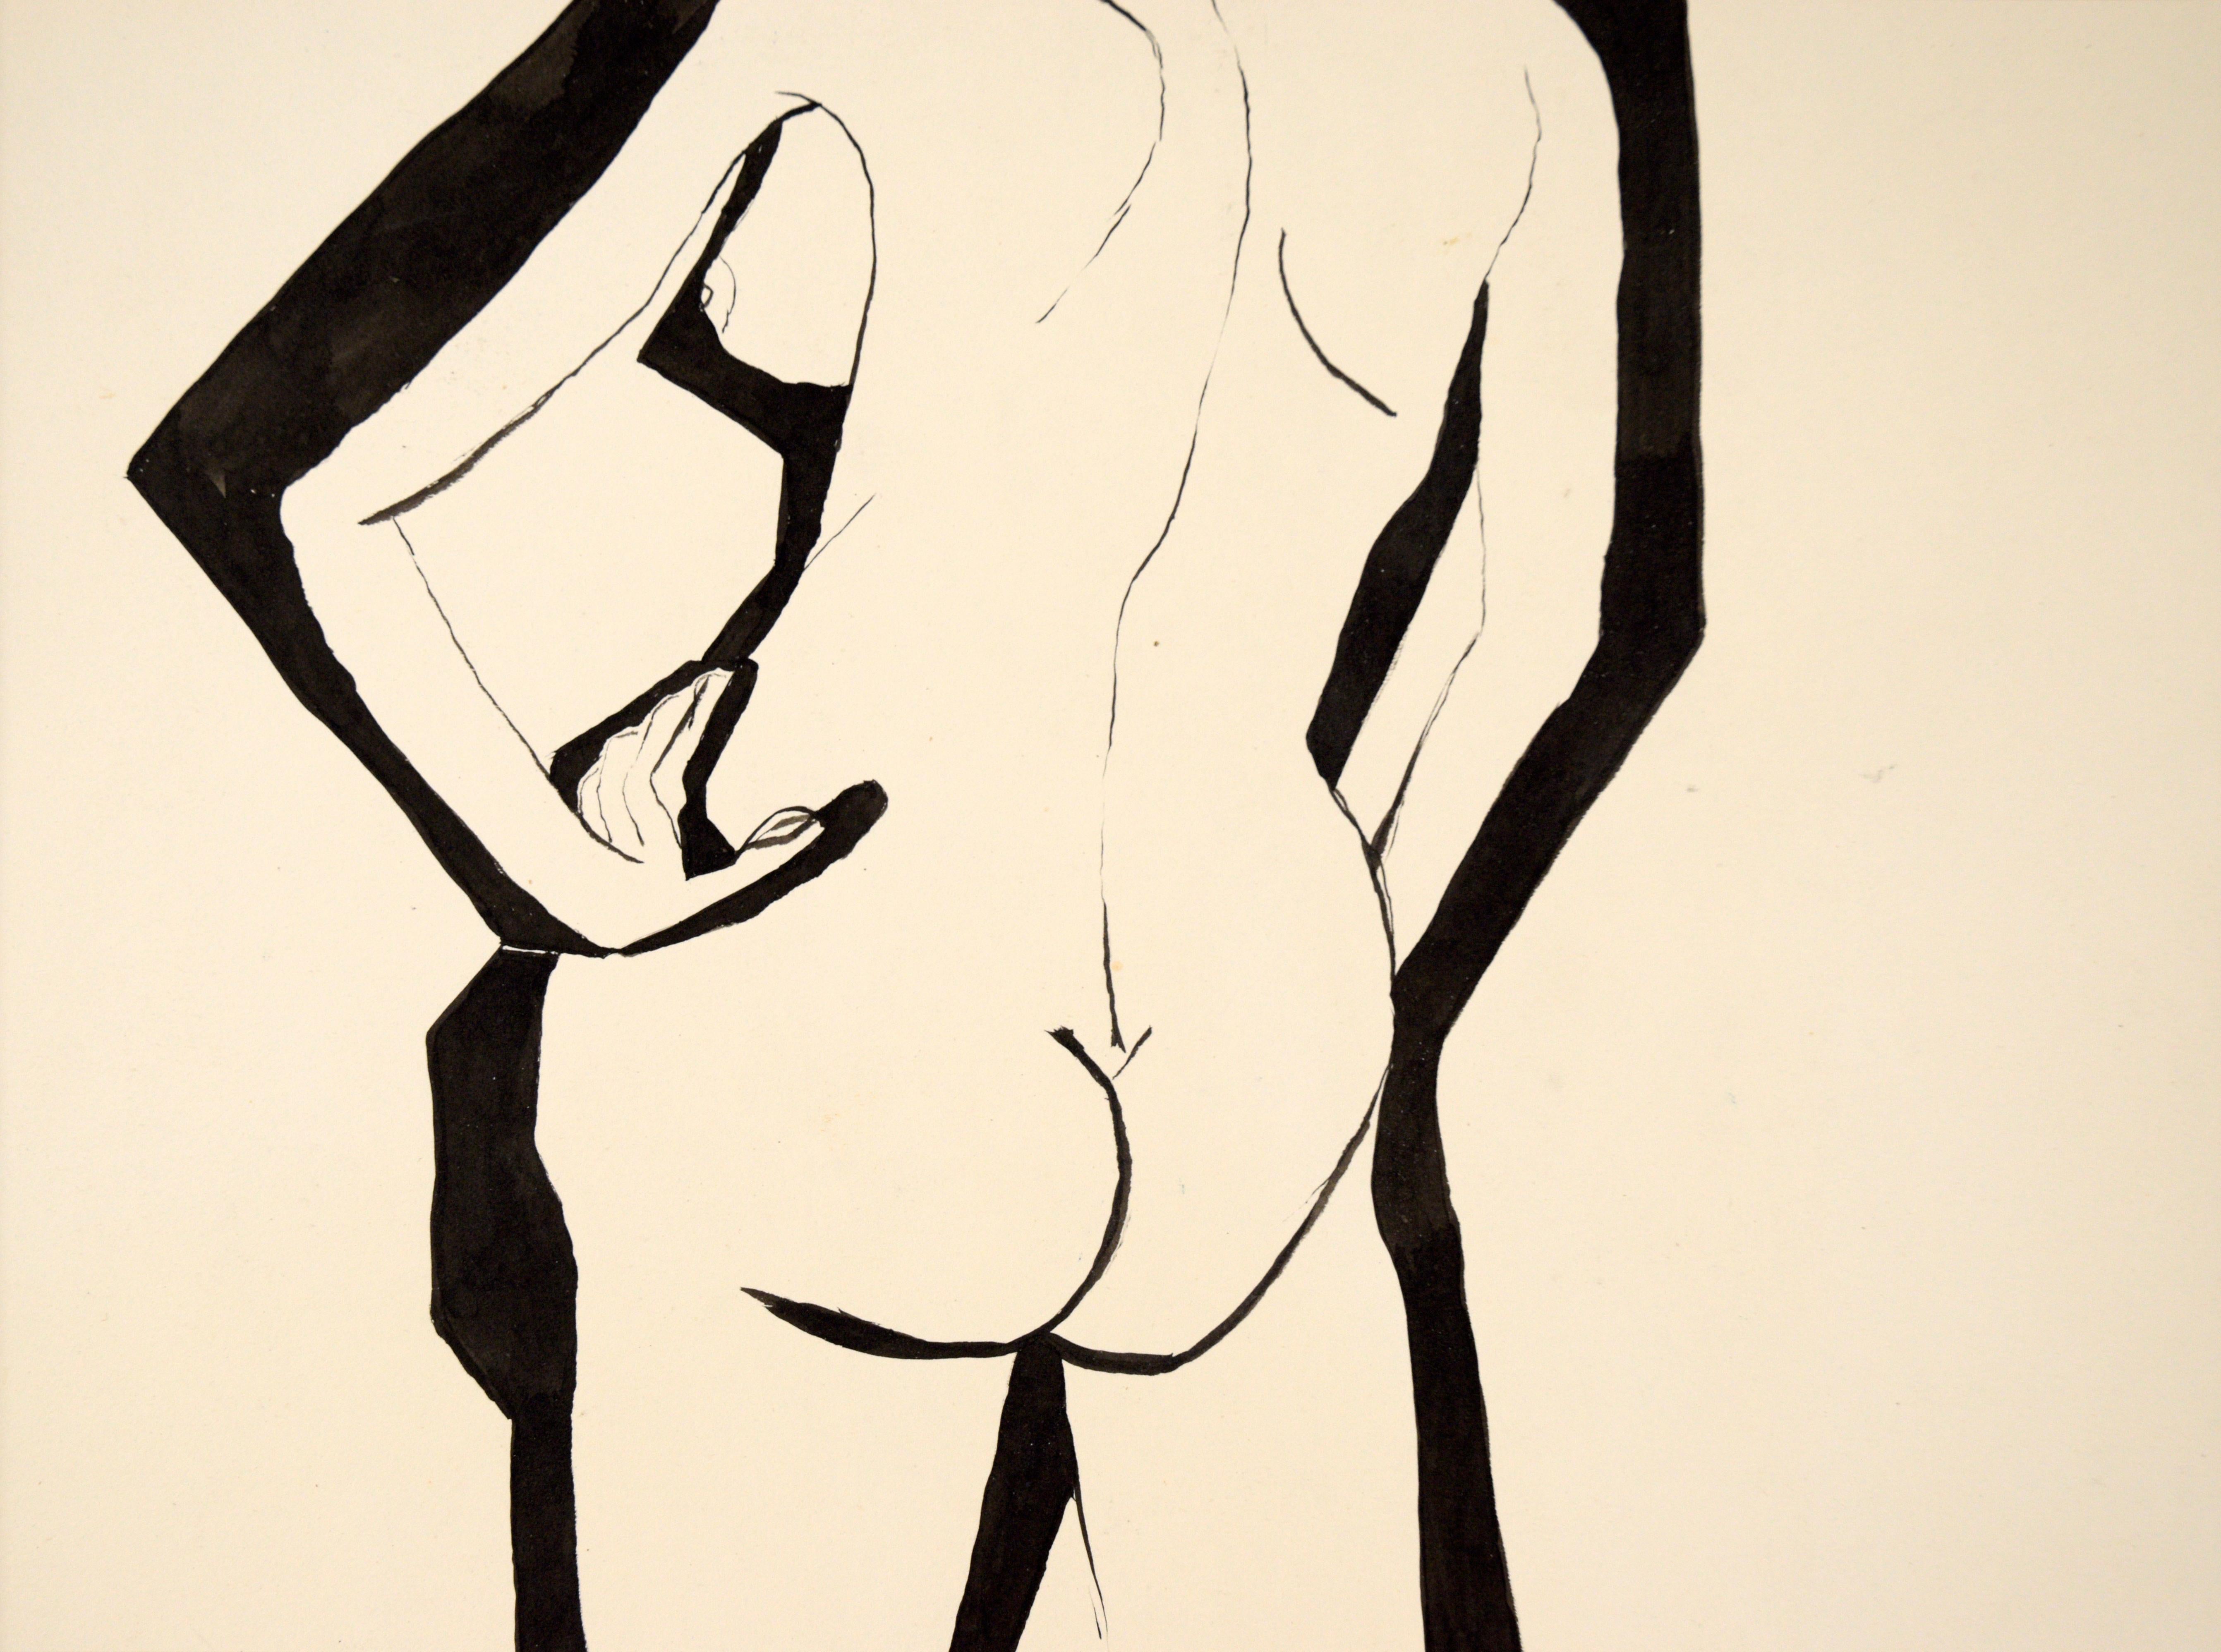 Modernist Abstract Nude Figurative Painting in India Ink on Paper - Abstract Expressionist Art by Louis Nadalini